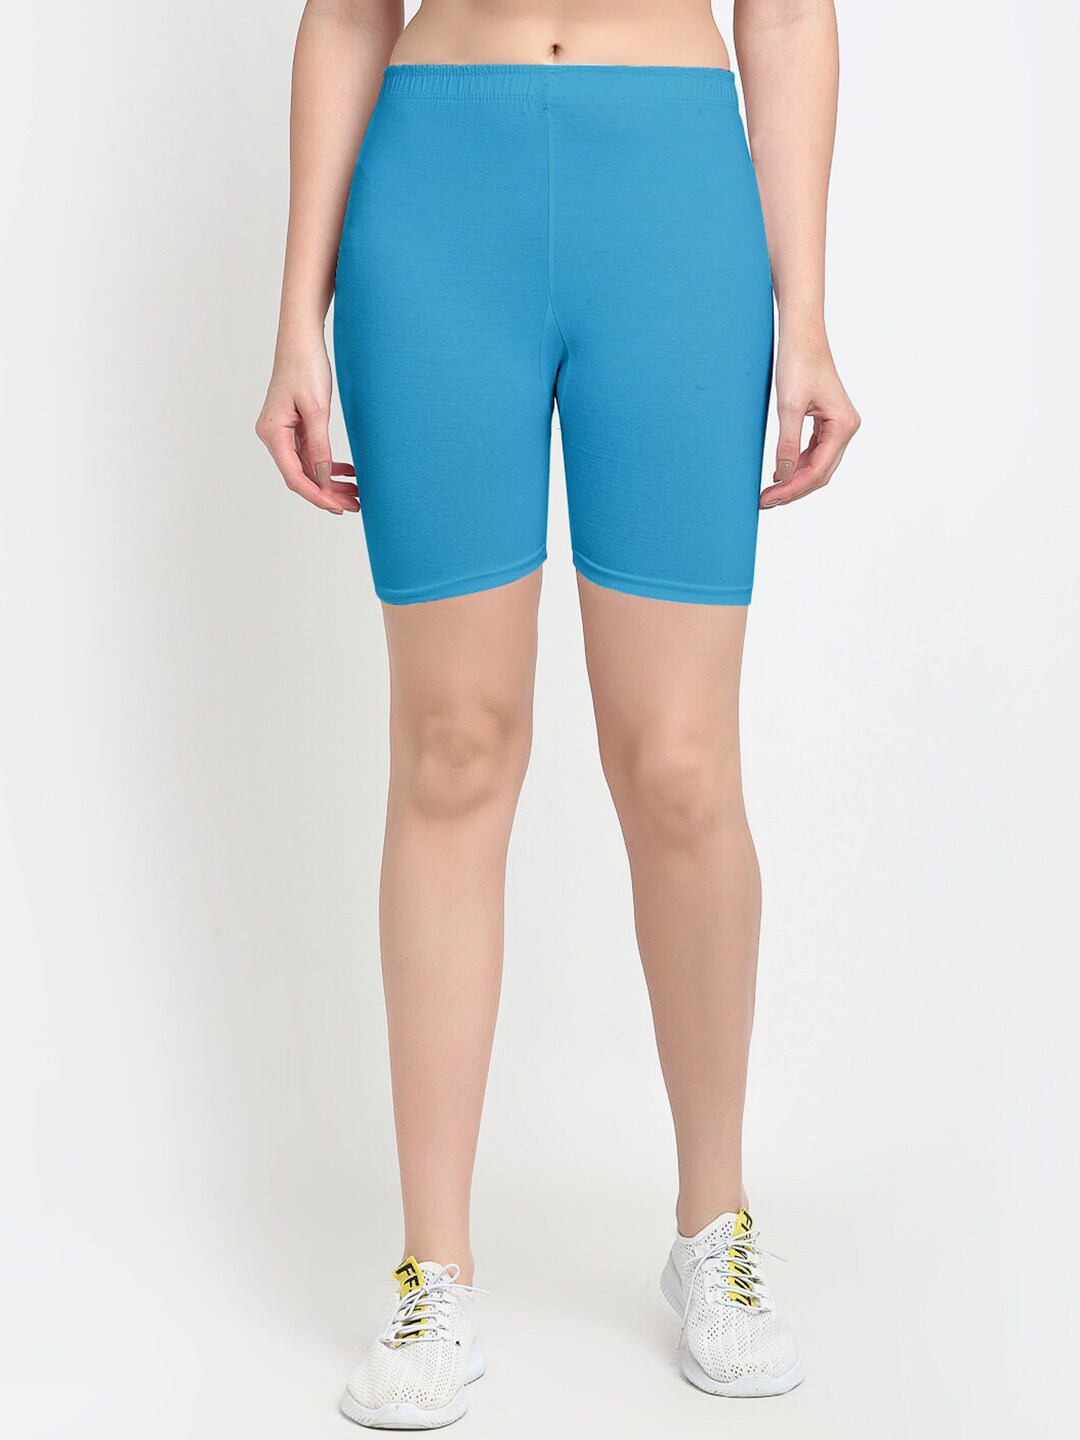 GRACIT Women Blue Cycling Sports Shorts Price in India